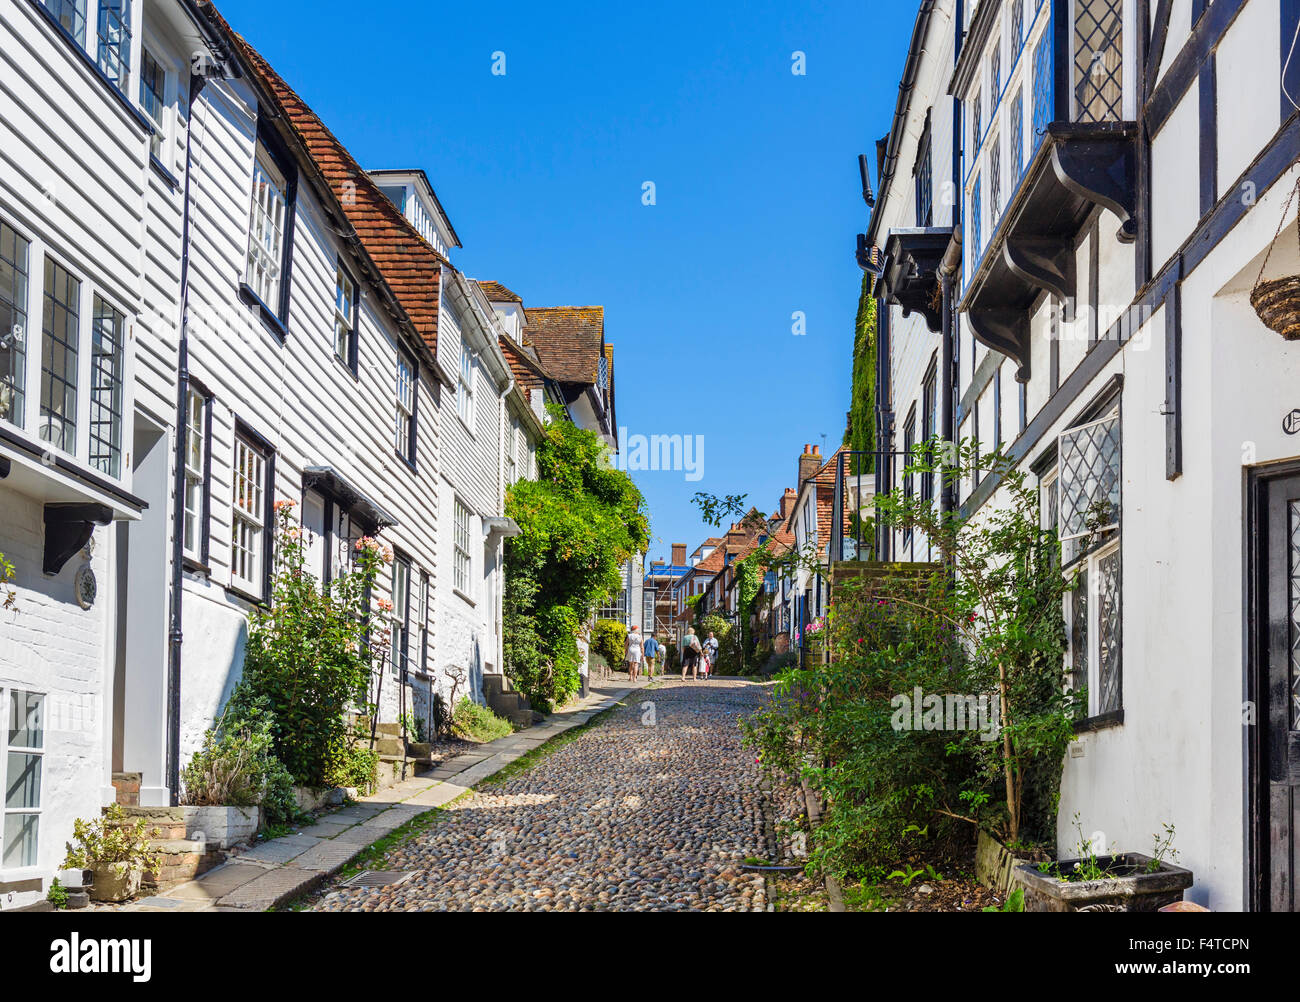 Historic Mermaid Street in the old town, Rye, East Sussex, England, UK Stock Photo